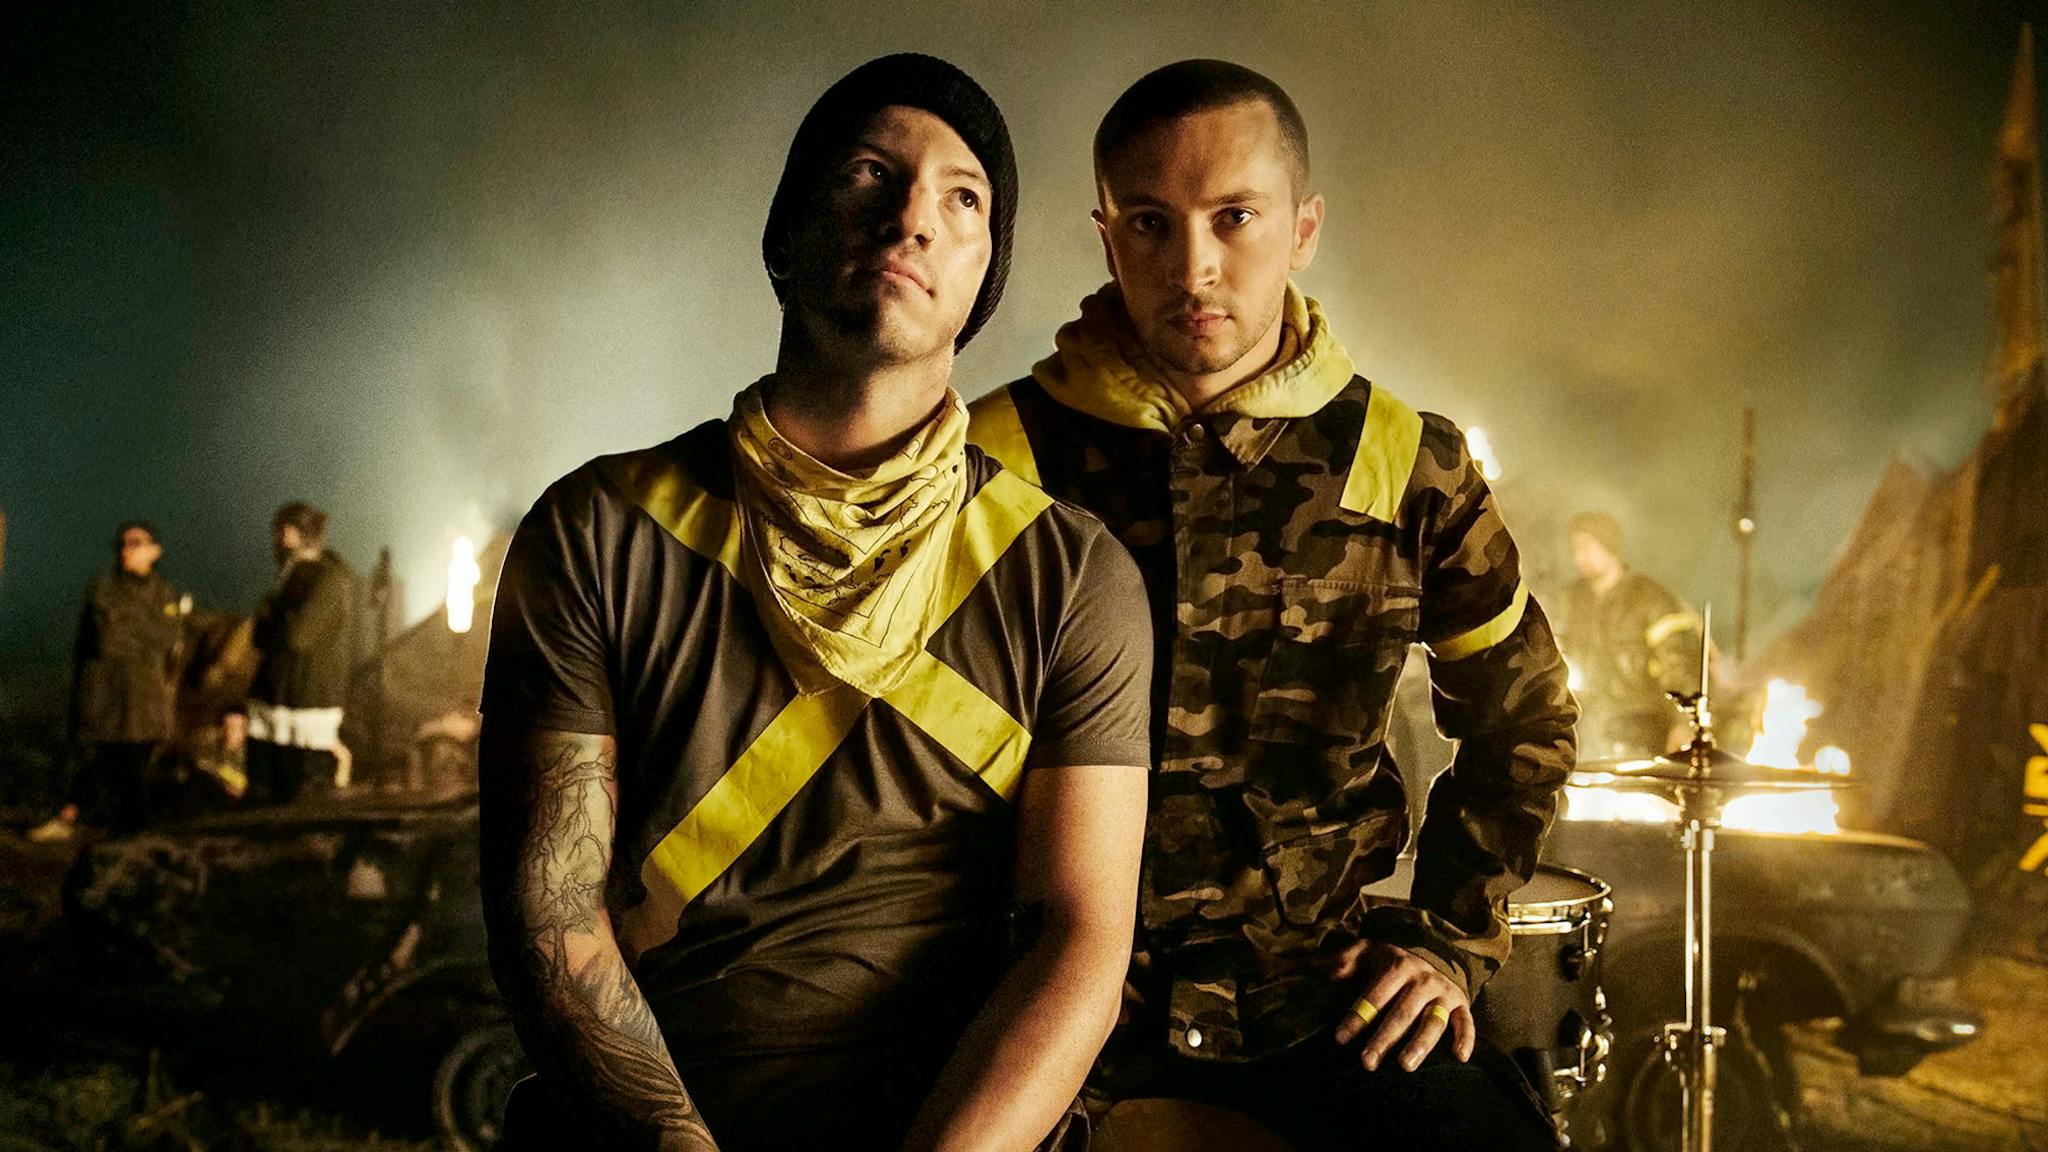 Trench The story of twenty one pilots’ most ambitious… Kerrang!